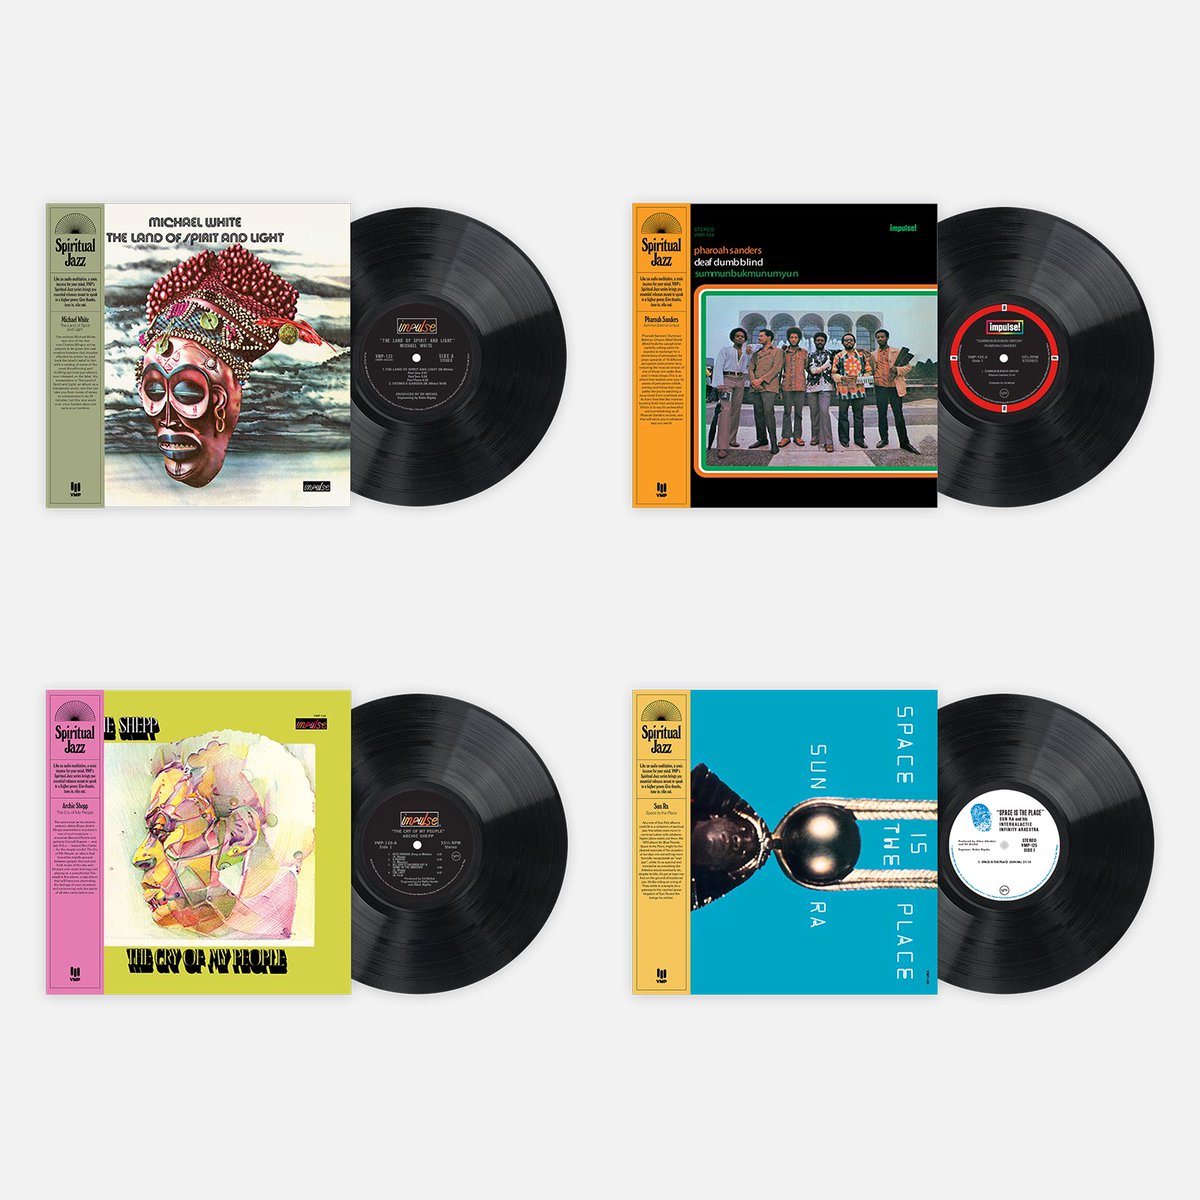 The VMP x Impulse Spiritual Jazz collection features titles that are all deep cut albums and deserve a look and a spin – bit.ly/3Xu04ua